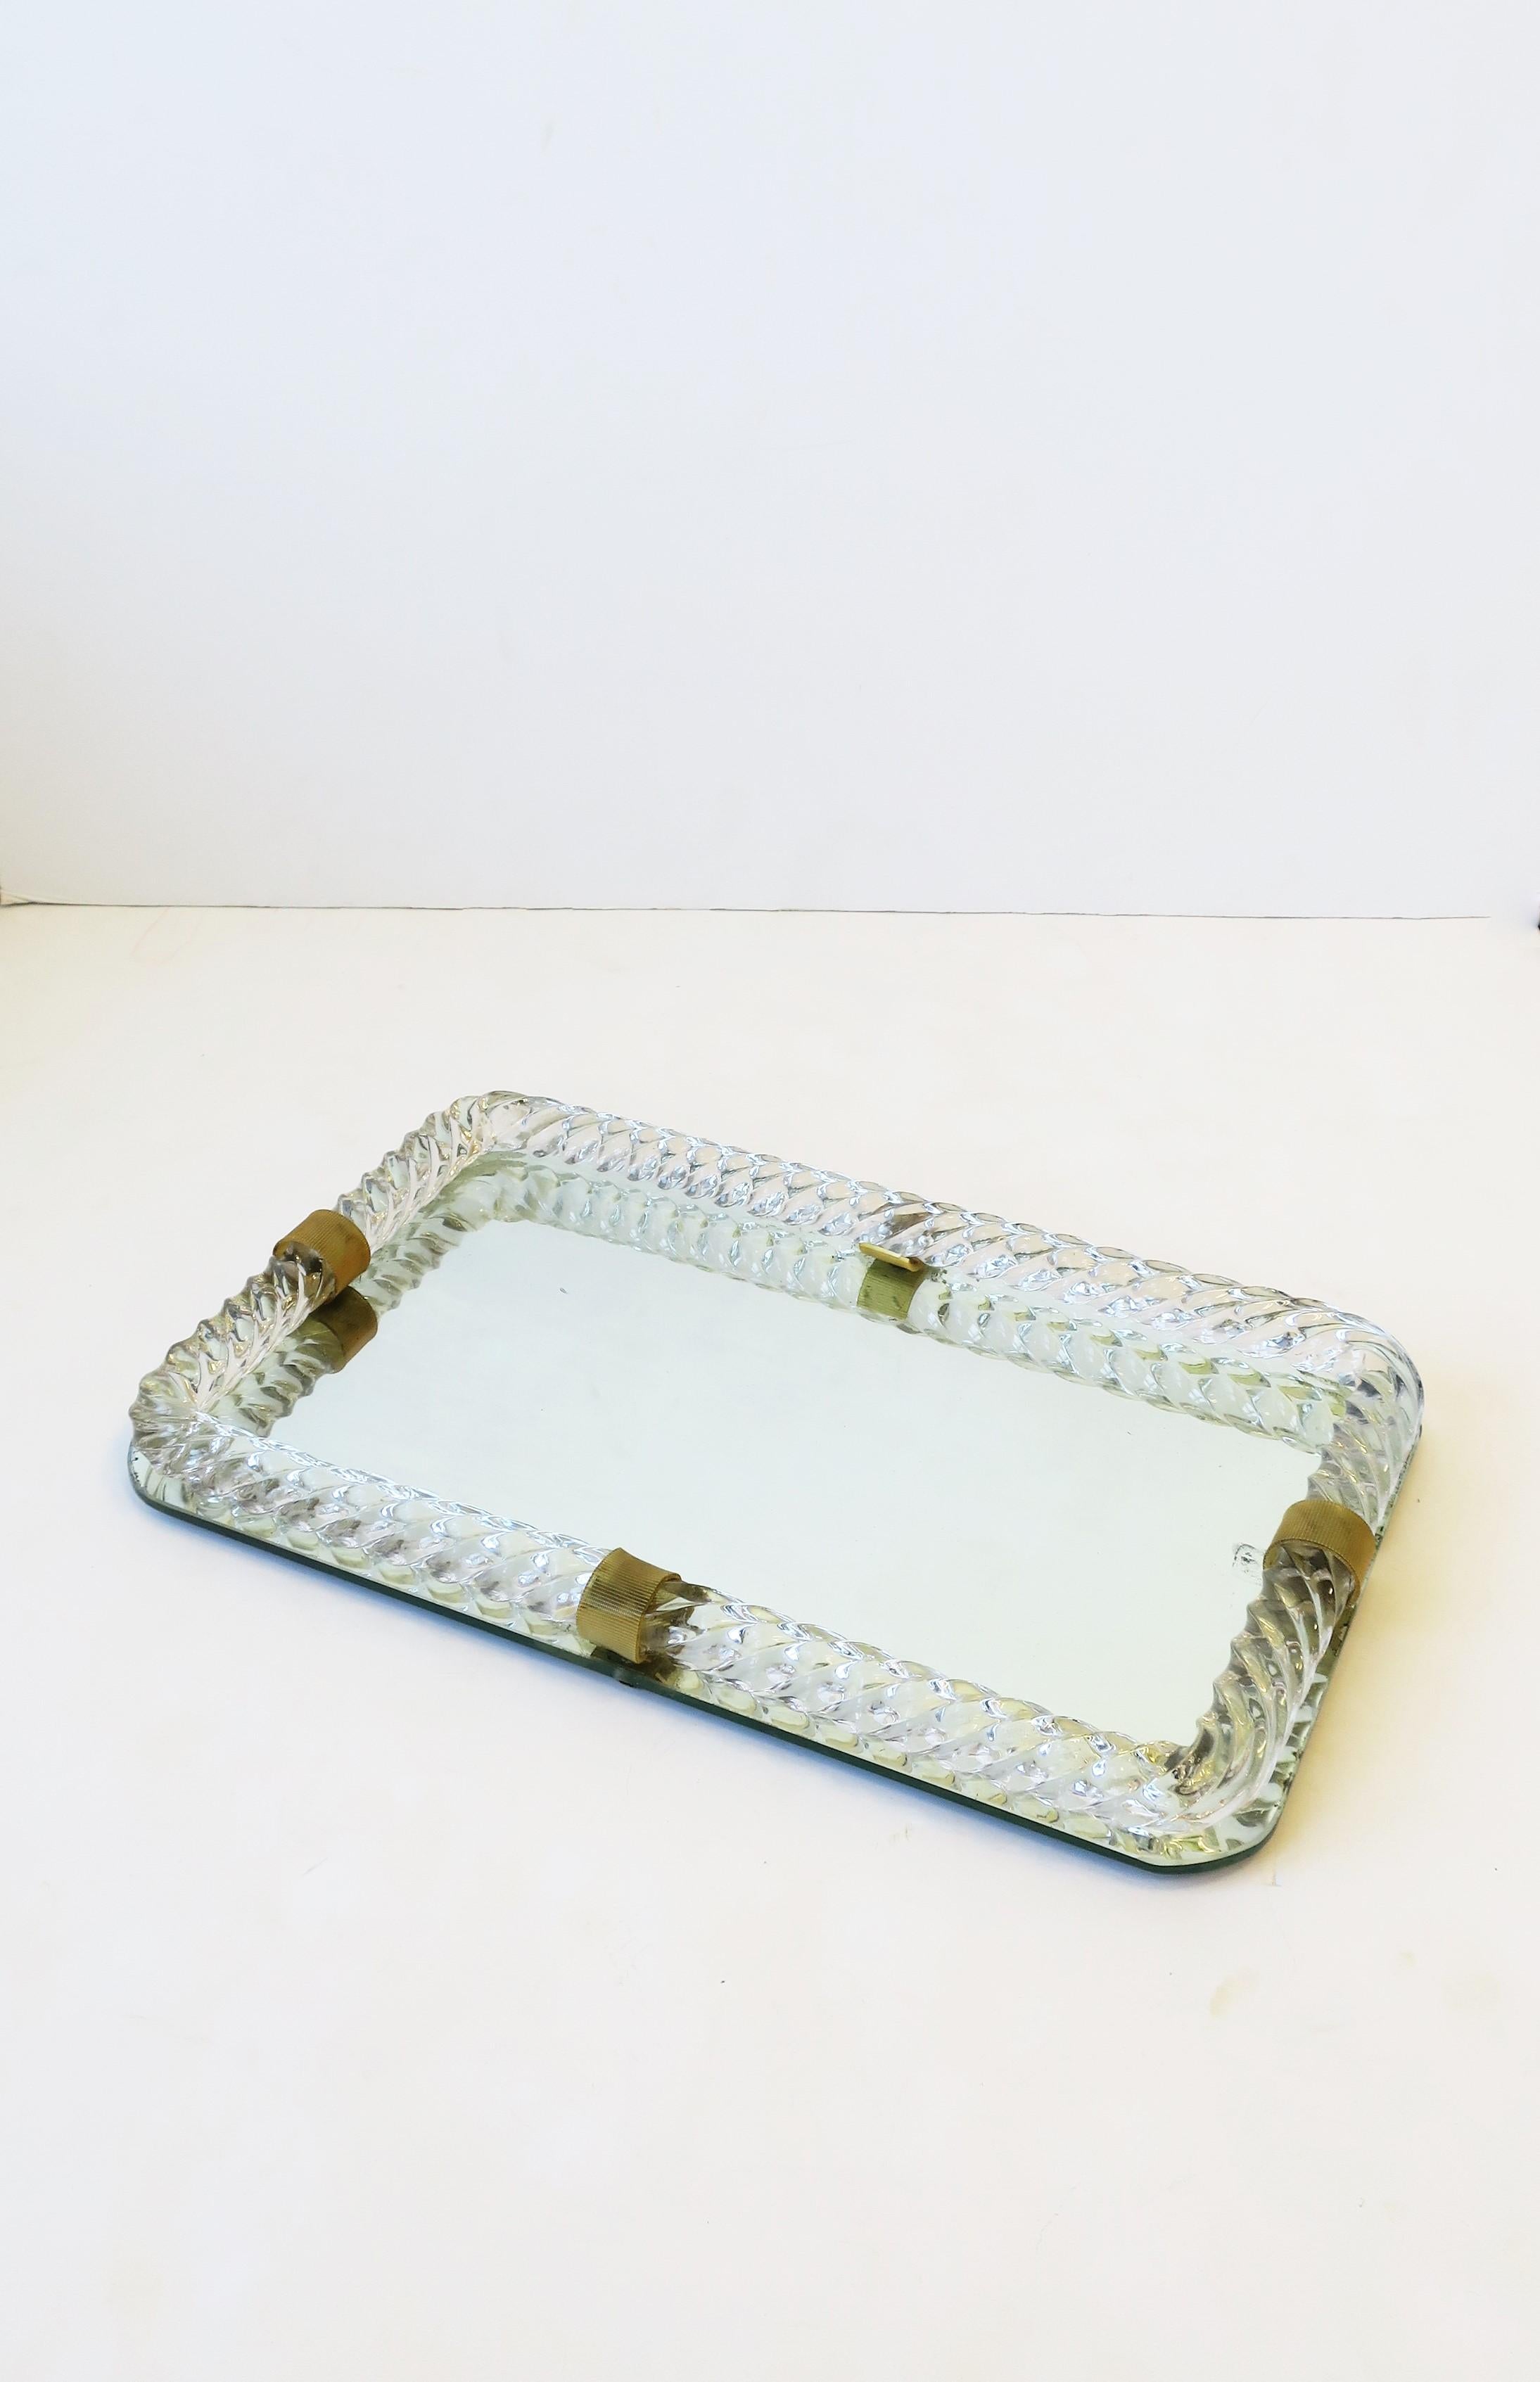 A beautiful Italian Murano art glass and mirror vanity tray, in the style of Venini, circa mid-20th century, Italy. Beautiful and substantial twisted Murano art glass with celluloid loop detailing and mirrored base. A special piece to hold jewelry,